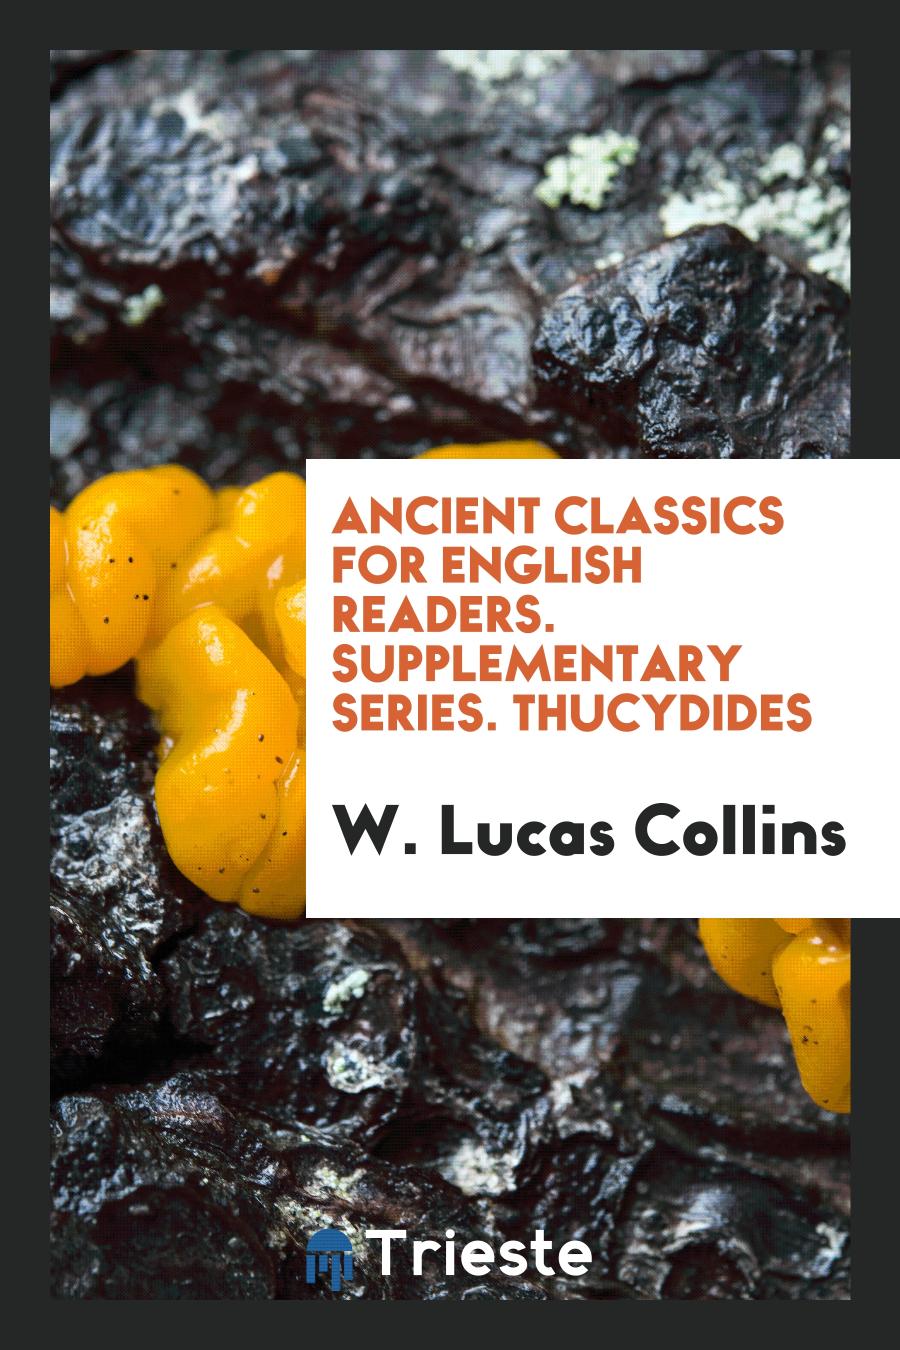 Ancient Classics for English Readers. Supplementary Series. Thucydides